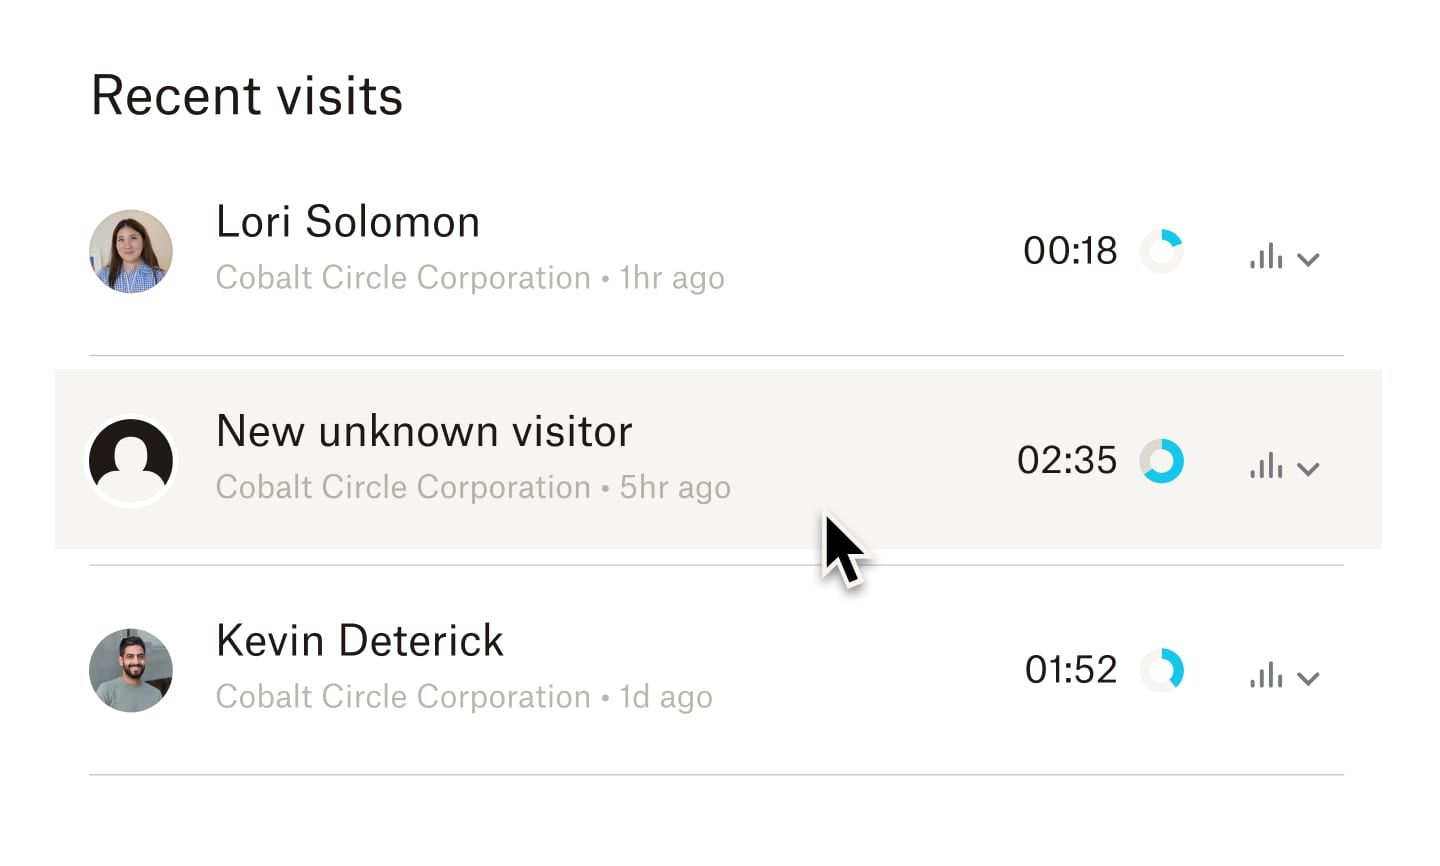 A list of recent visits to a document that includes a “new unknown visitor” profile showing the company the user is associated with